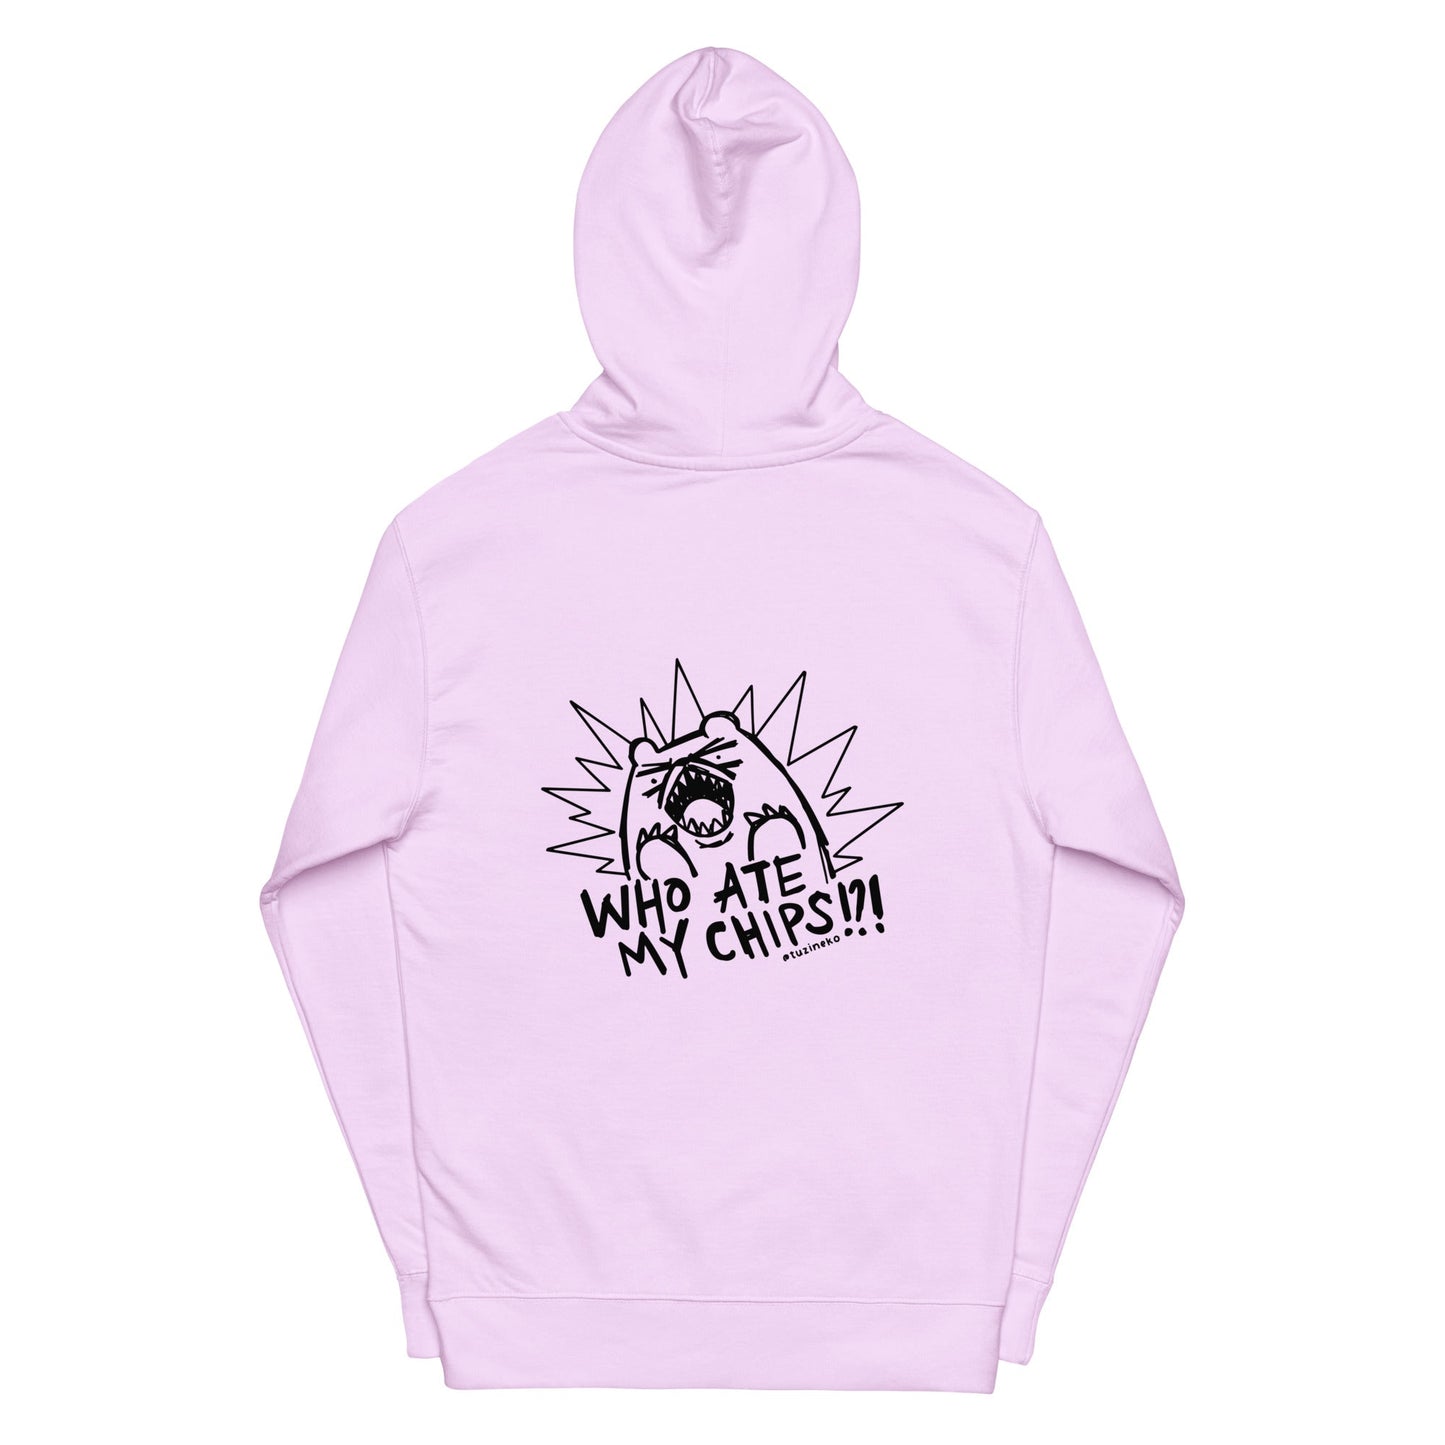 Angry Gom and Neko "Who Ate My Chips!?!" Unisex Hoodie